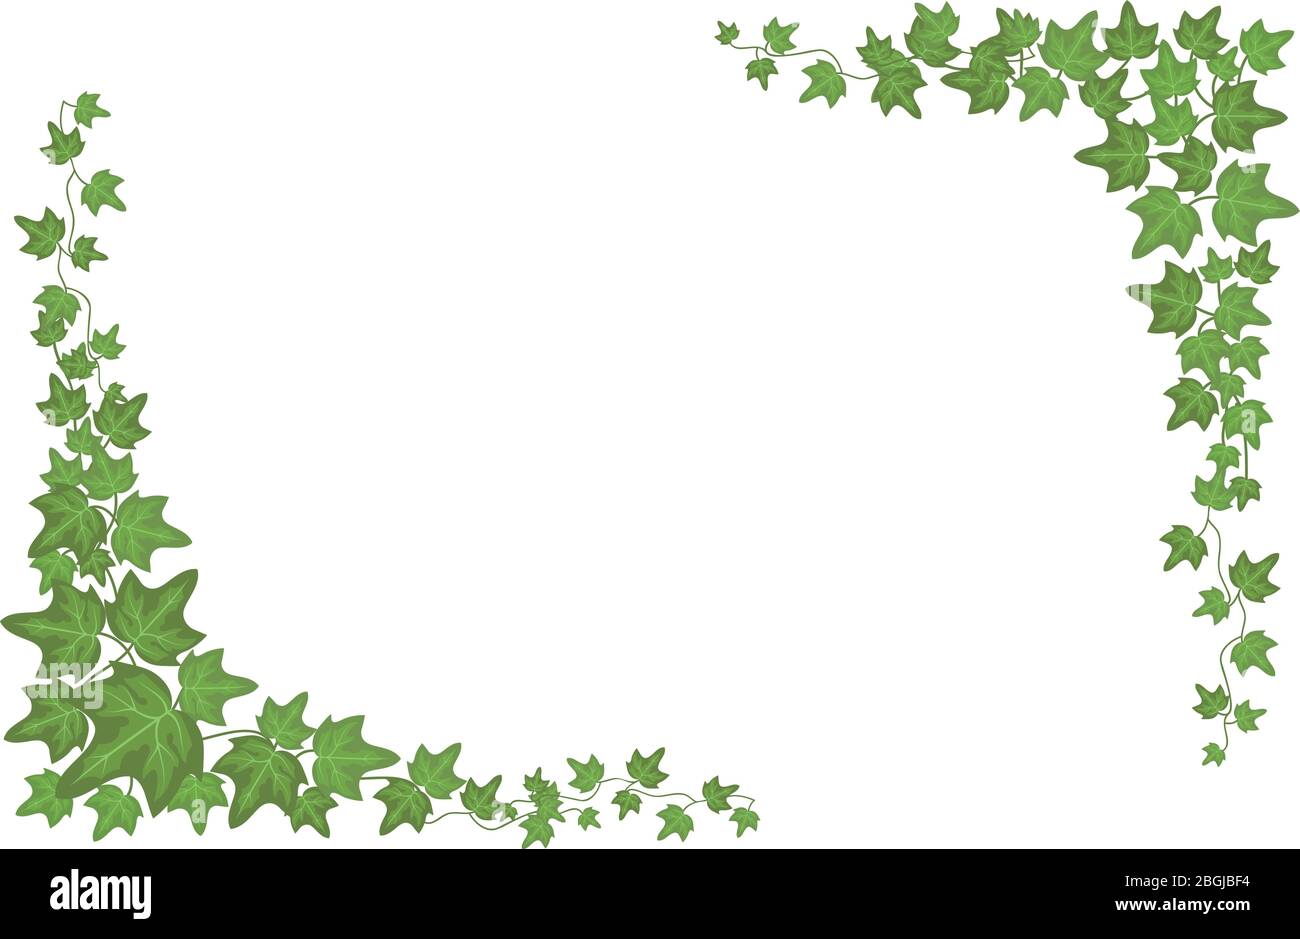 Decorative green ivy wall climbing plant vector frame. Foliage decoration wall, branch frame green leaf illustration Stock Vector